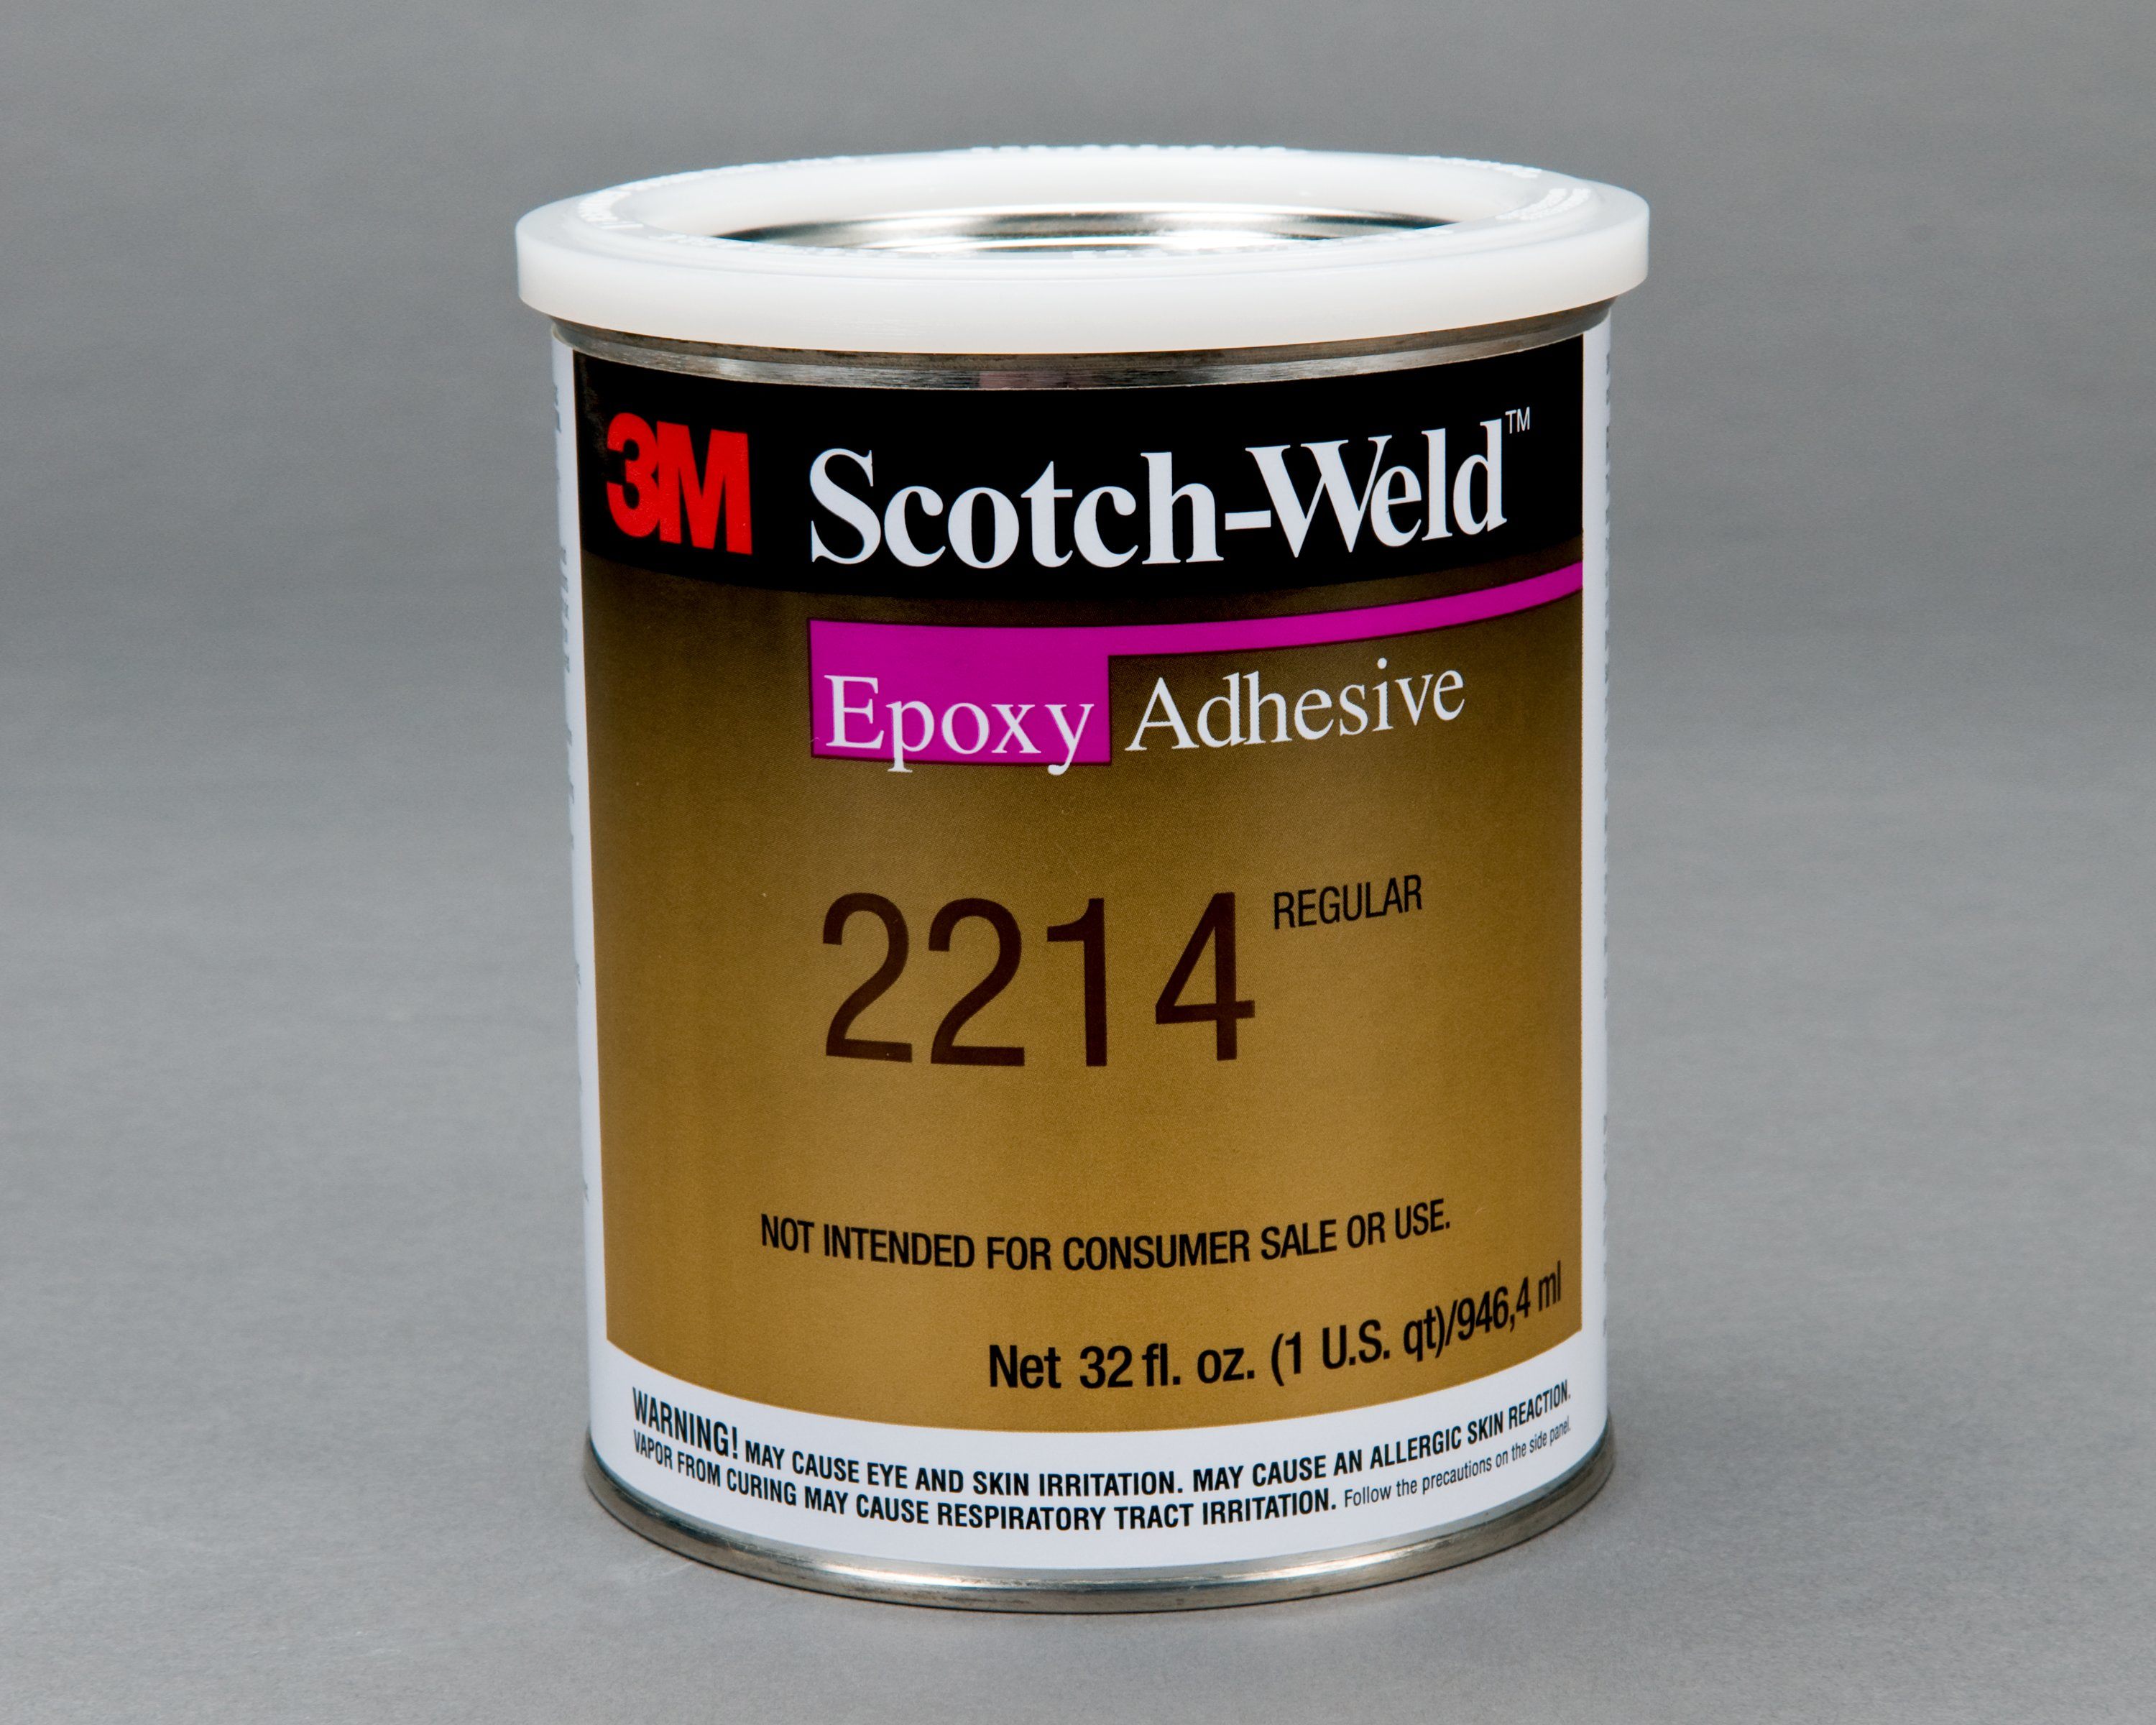 3M™ Scotch-Weld™ Epoxy Adhesive 2214 Regular is an aluminum-filled general purpose product for use in applications where high strength bonds are needed in a temperature range of -67°F to 250°F (-53°C to 121°C).